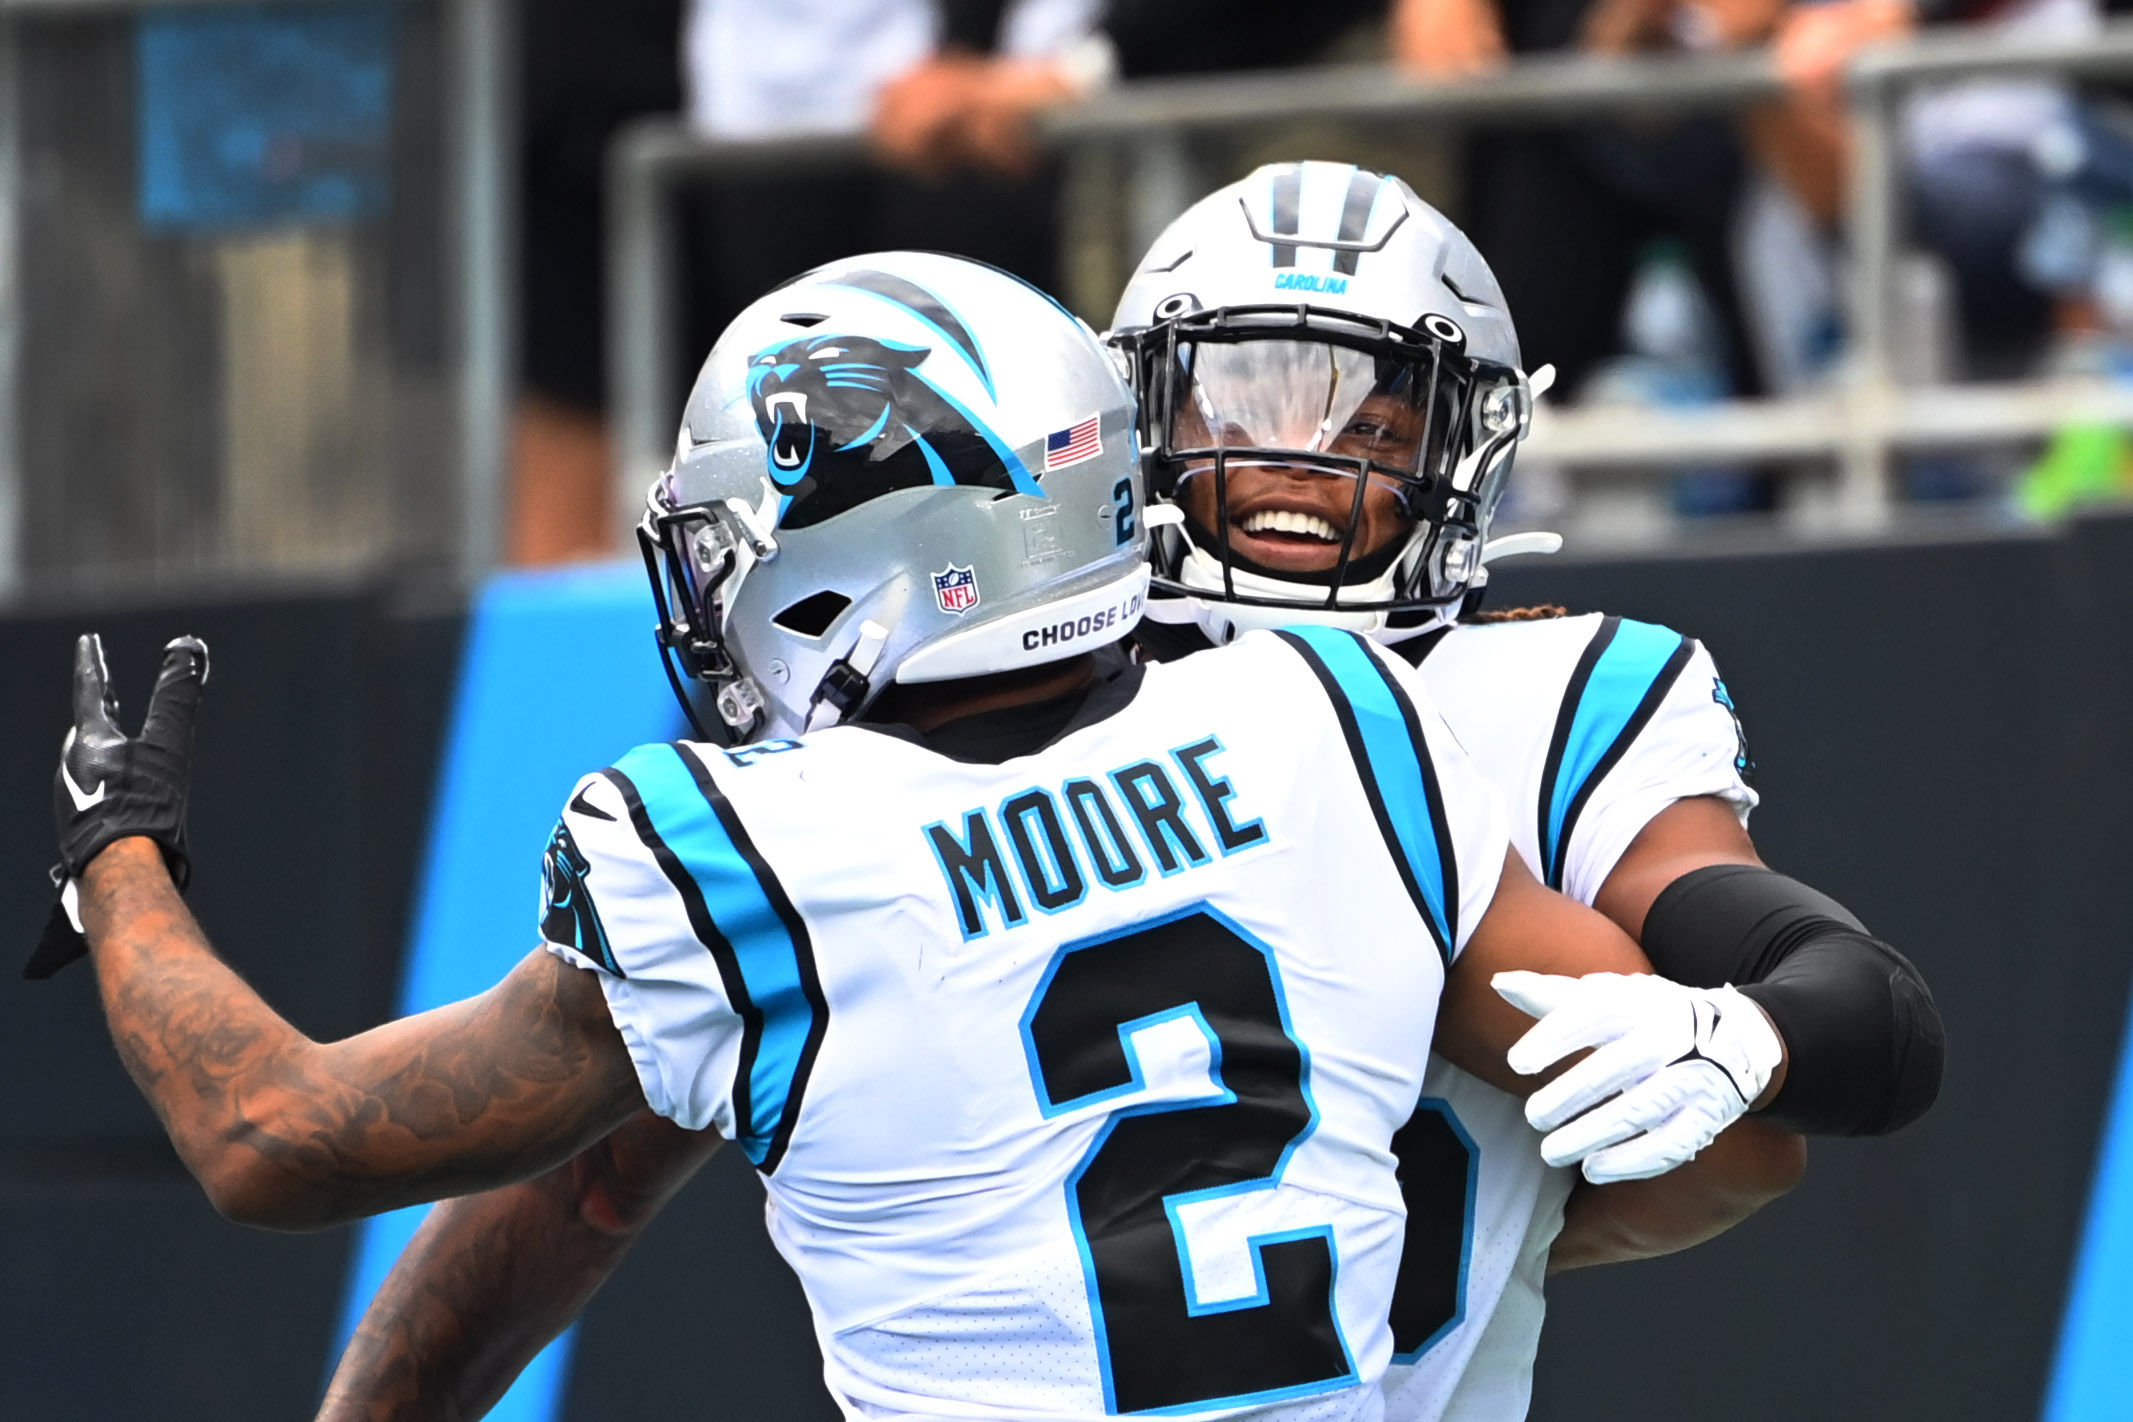 D.J. Moore drawing significant trade interest, Carolina Panthers view him as ‘foundational piece’